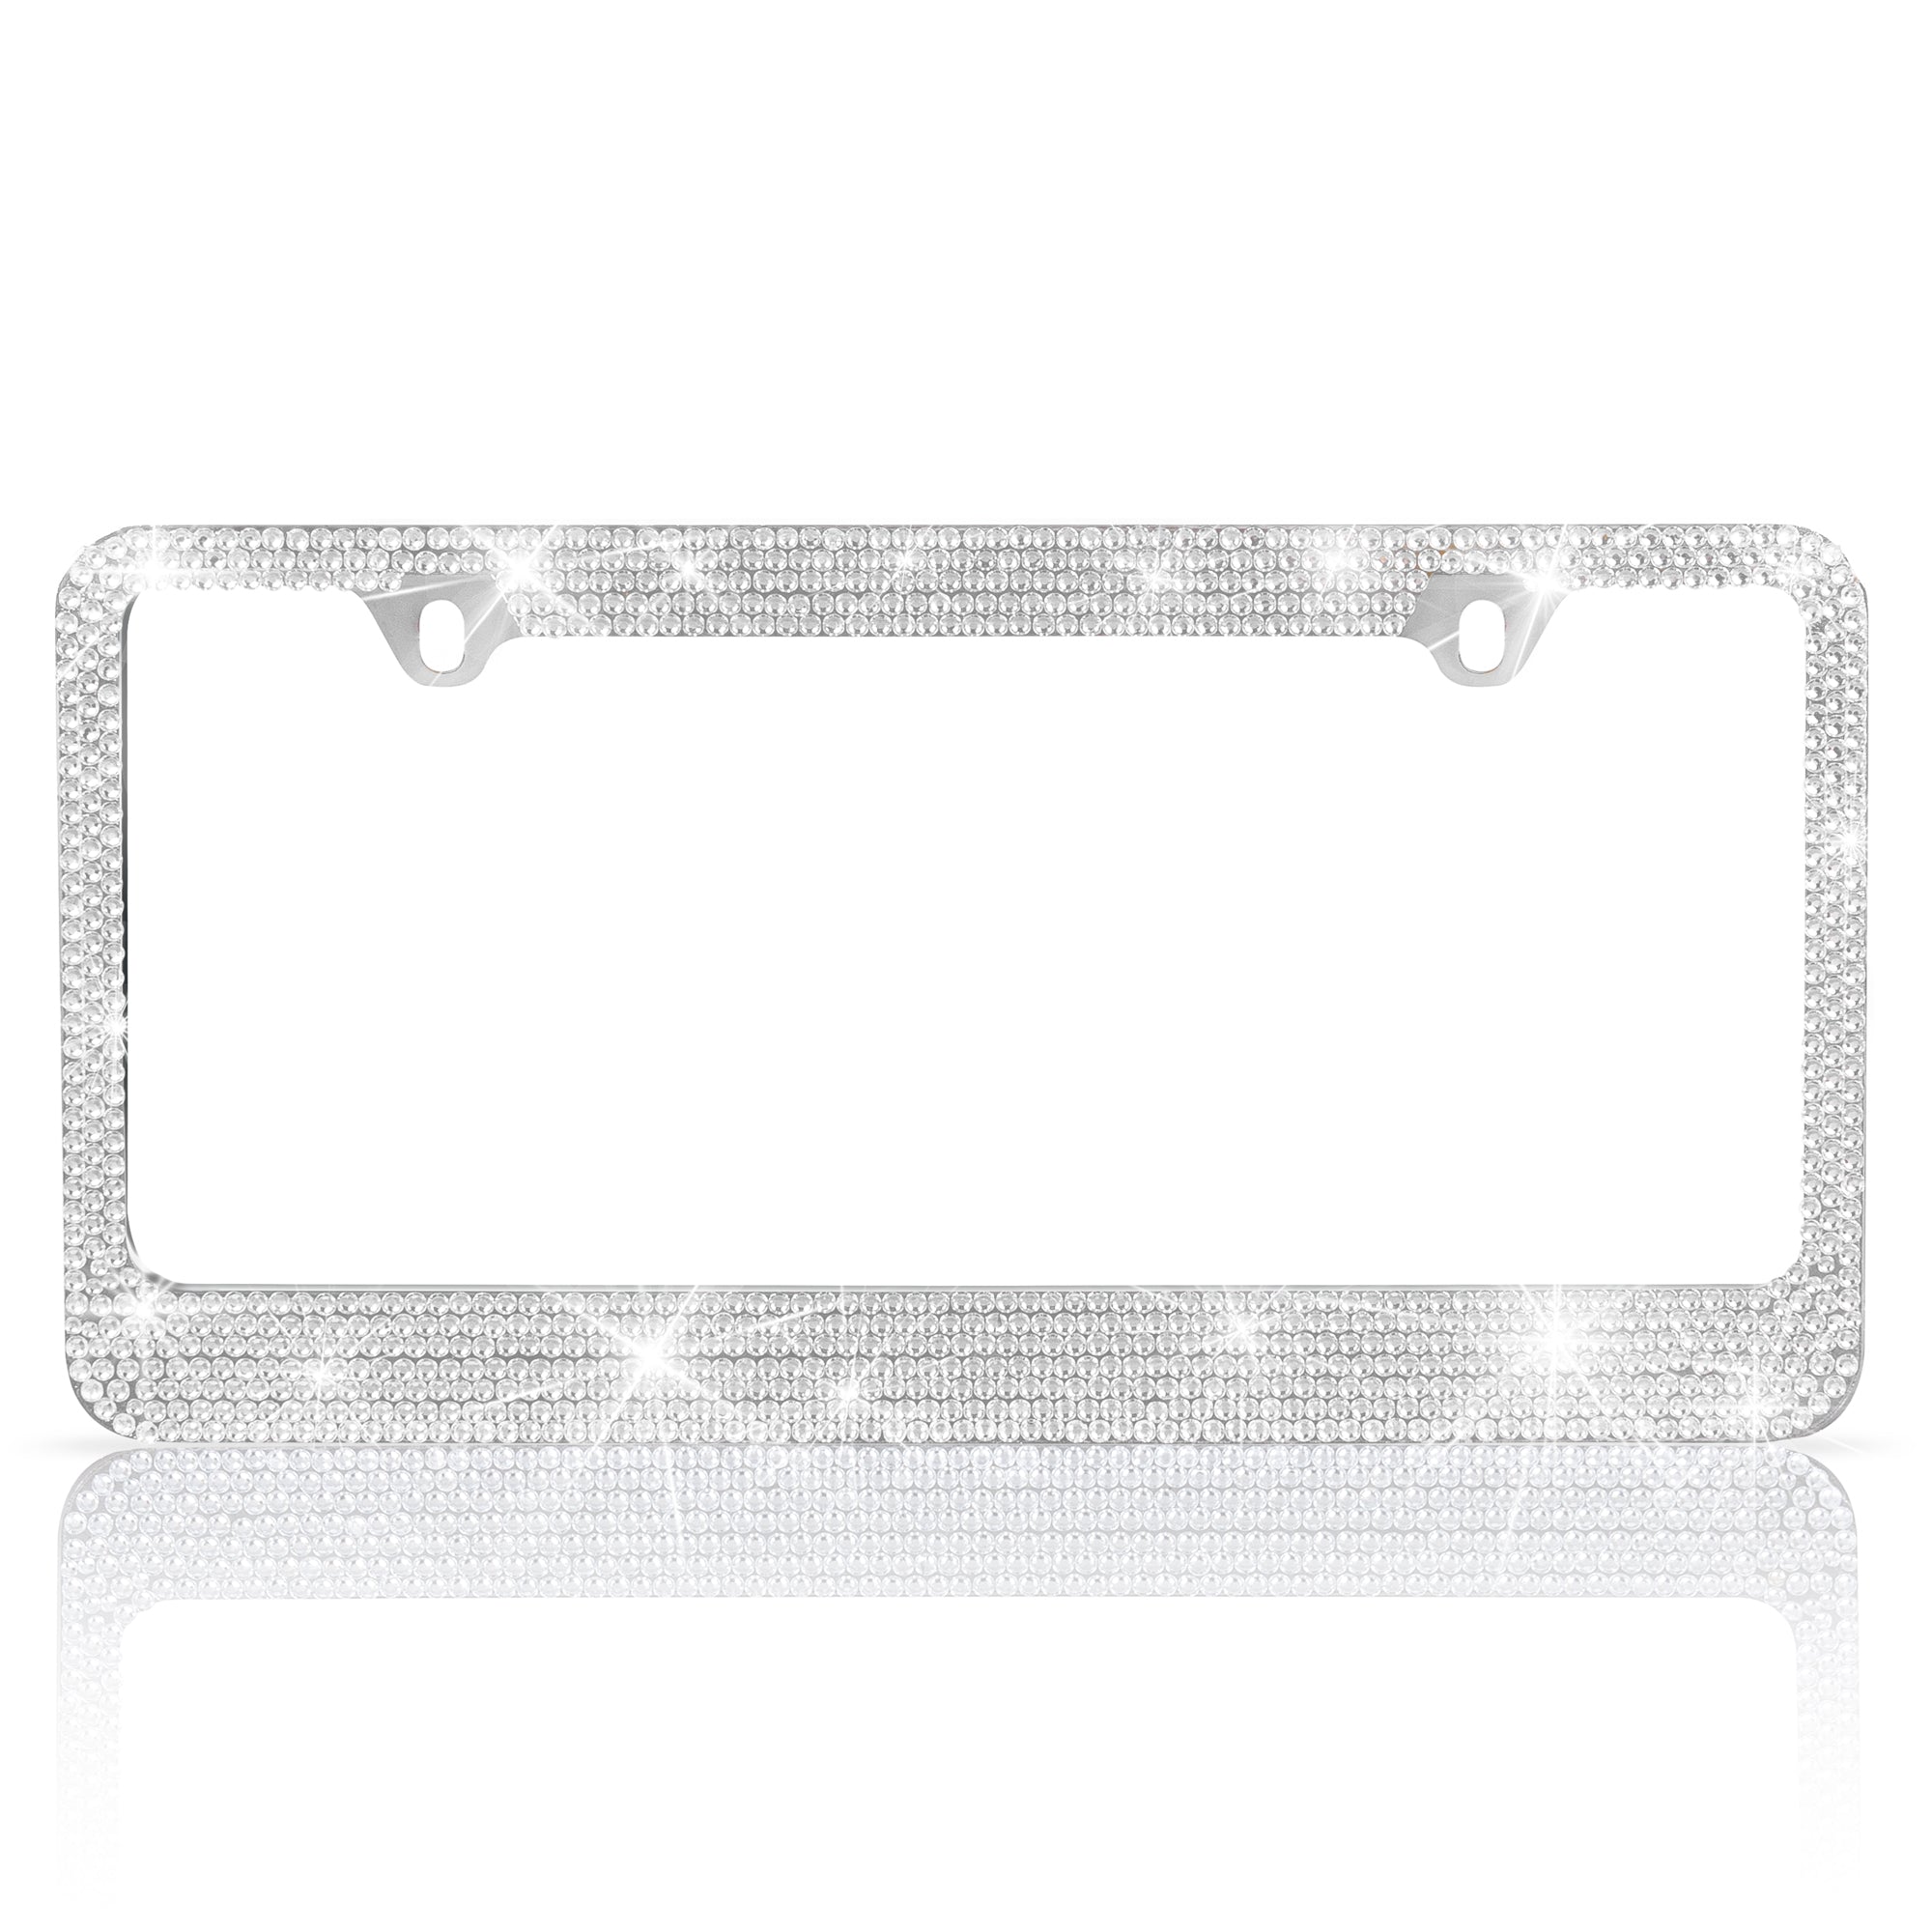 Stainless Steel Silver Sparkly Sparkling Diamond Crystal Bling Premium License Plate Frame Stainless Steel Metal Silver Rhinestone for Women Universal Size for Car Truck SUV (Pack of 2)